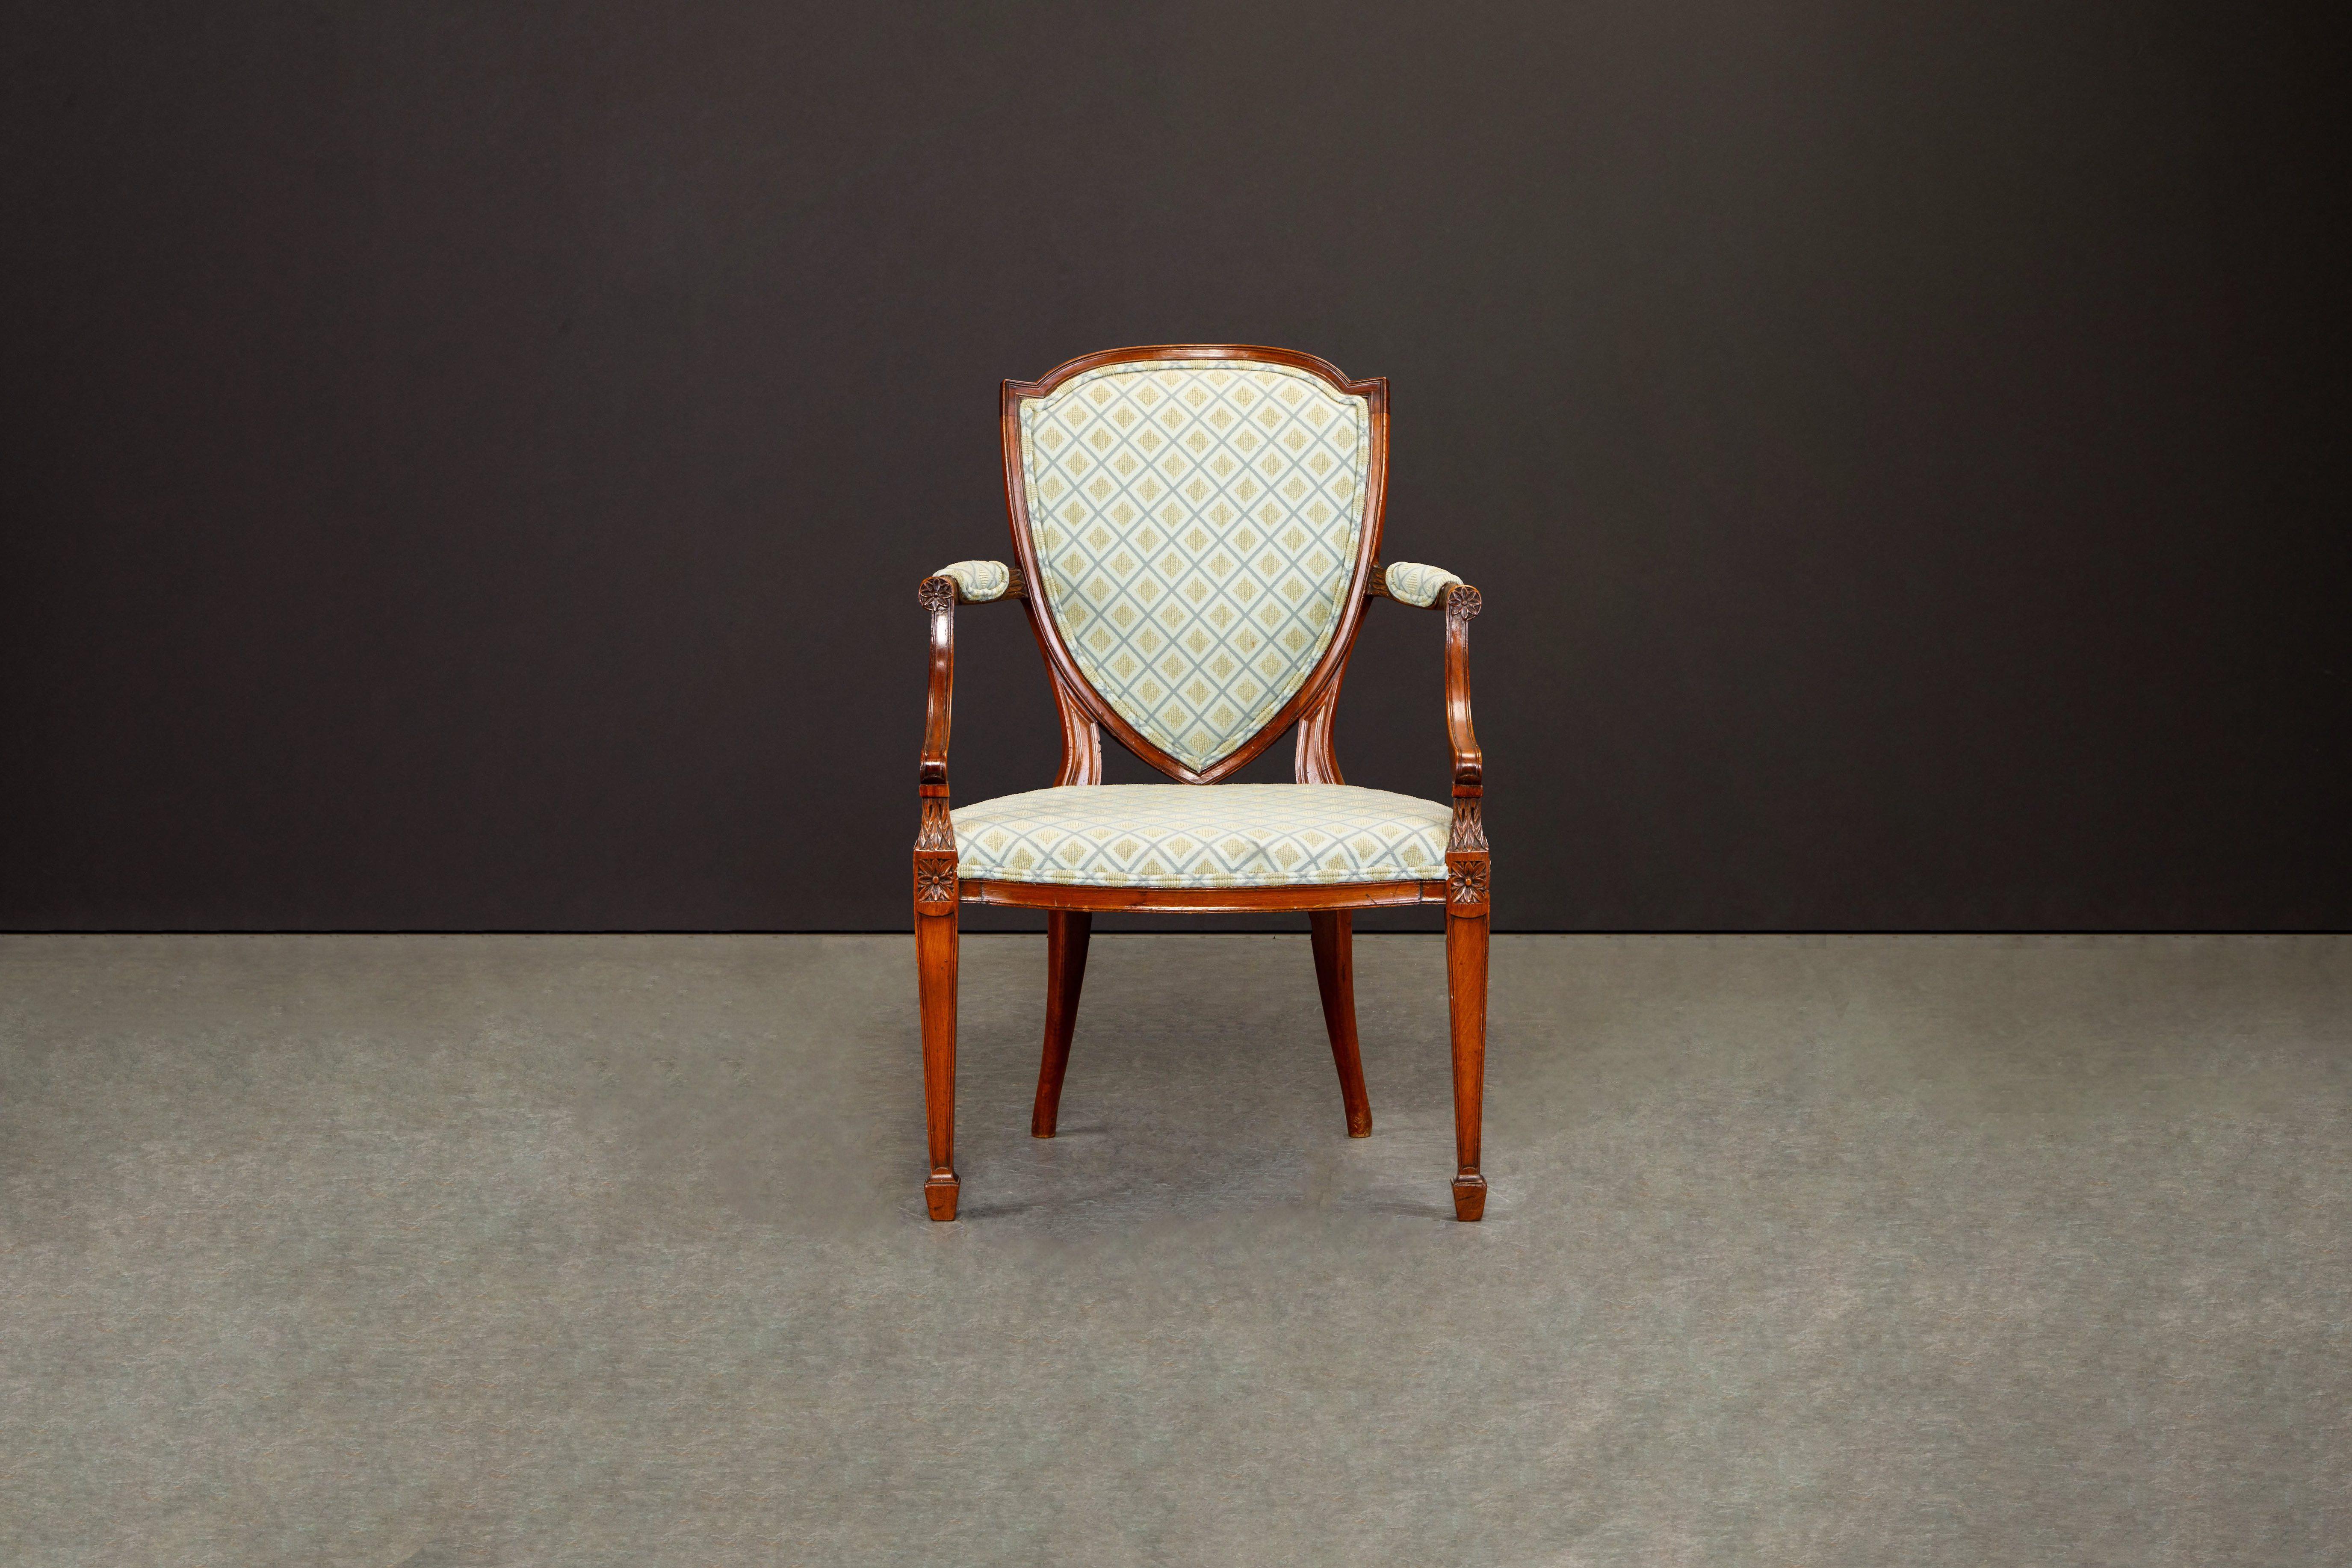 English Pair of Upholstered Hepplewhite Shield-Back Armchairs w Provenance, circa 1870s For Sale